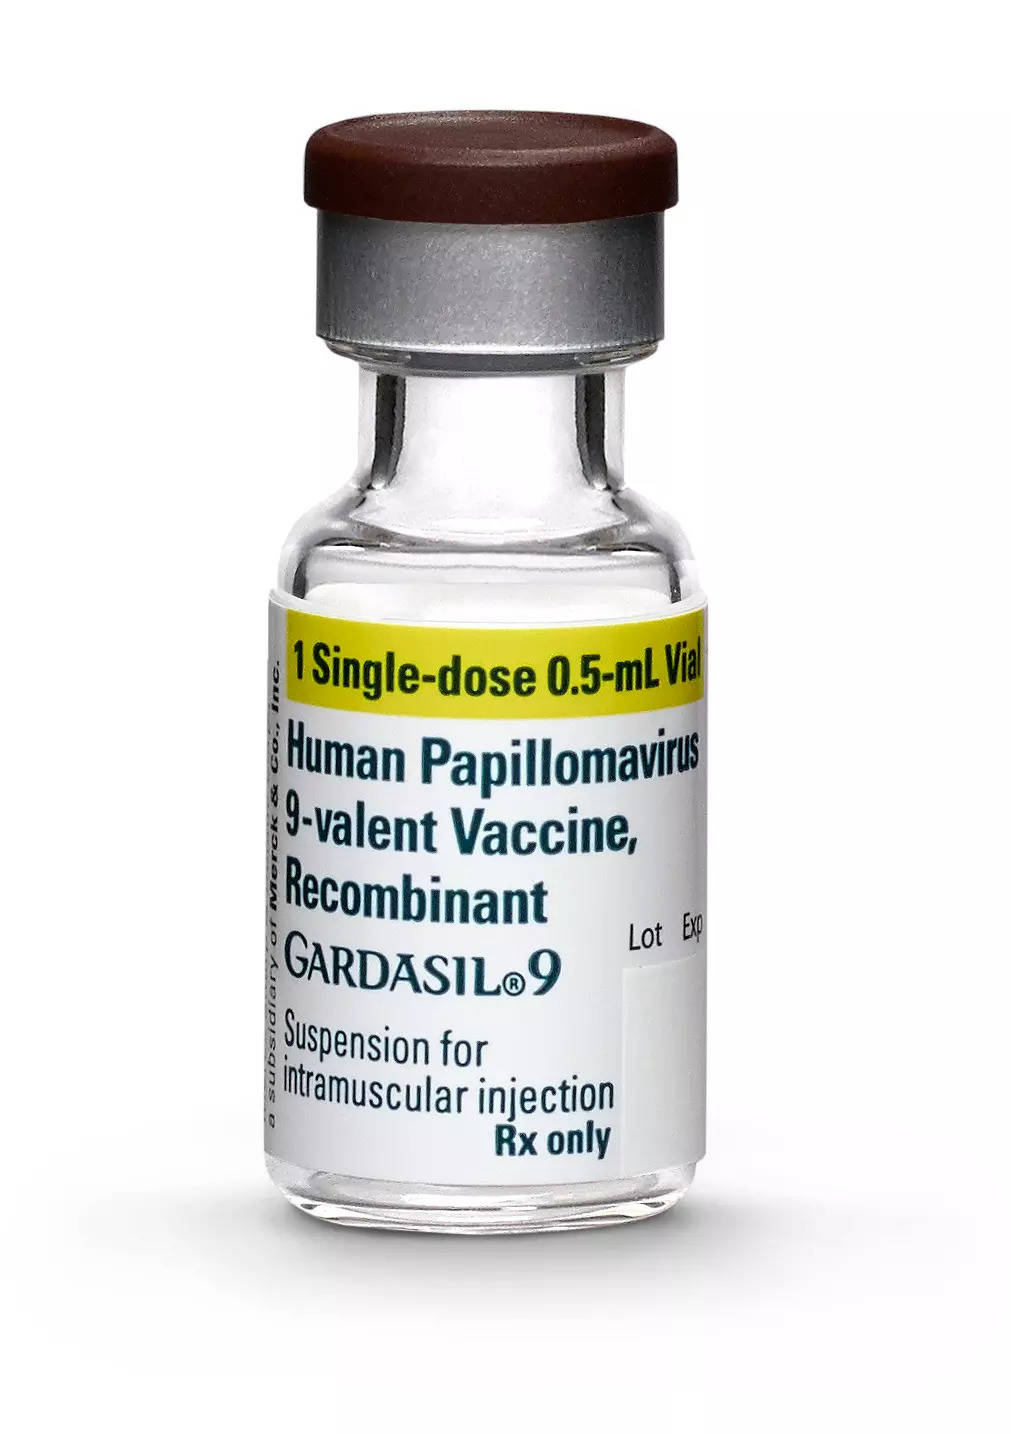 Merck expands manufacturing capacity of HPV vaccines to meet global demands